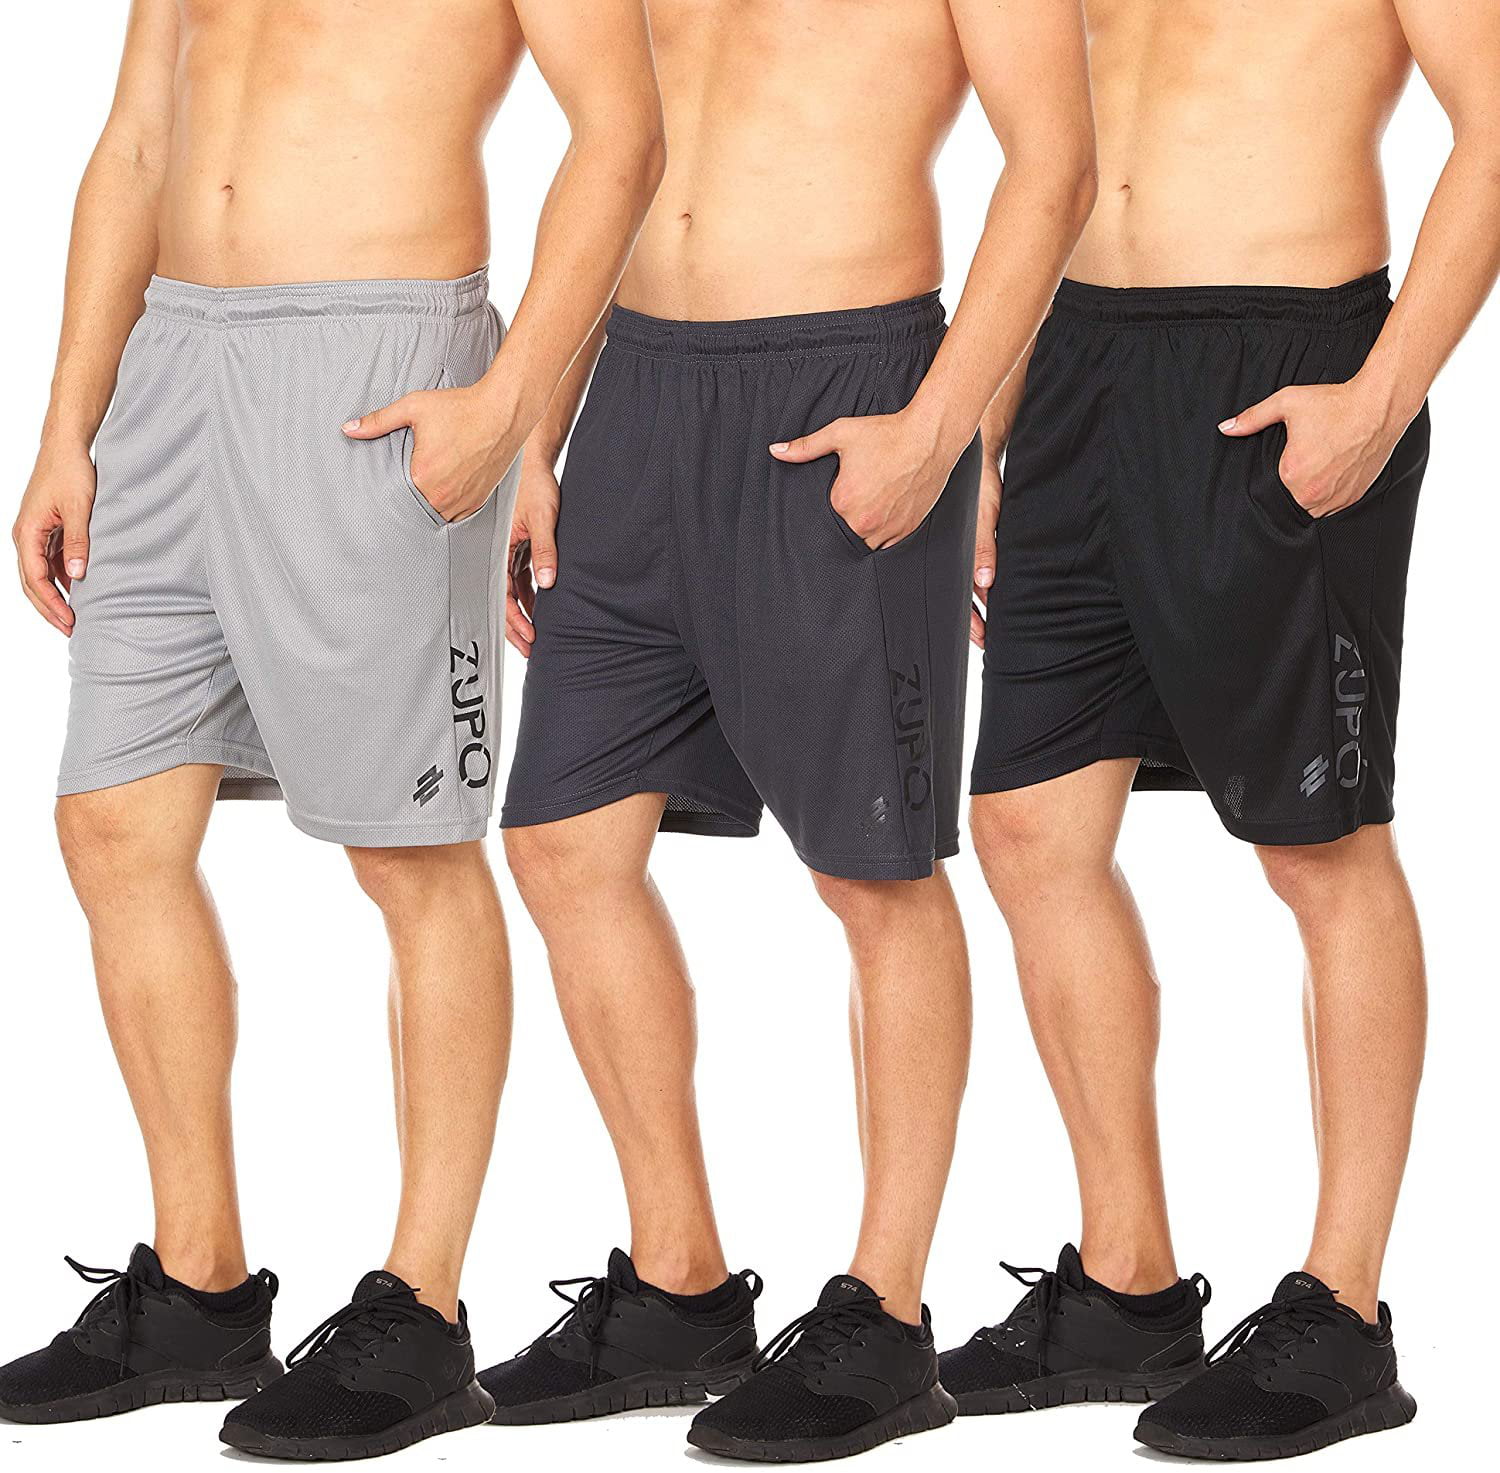 Men's Running Active Performance Athletic Workout Gym Shorts... Zupo 3 Pack 